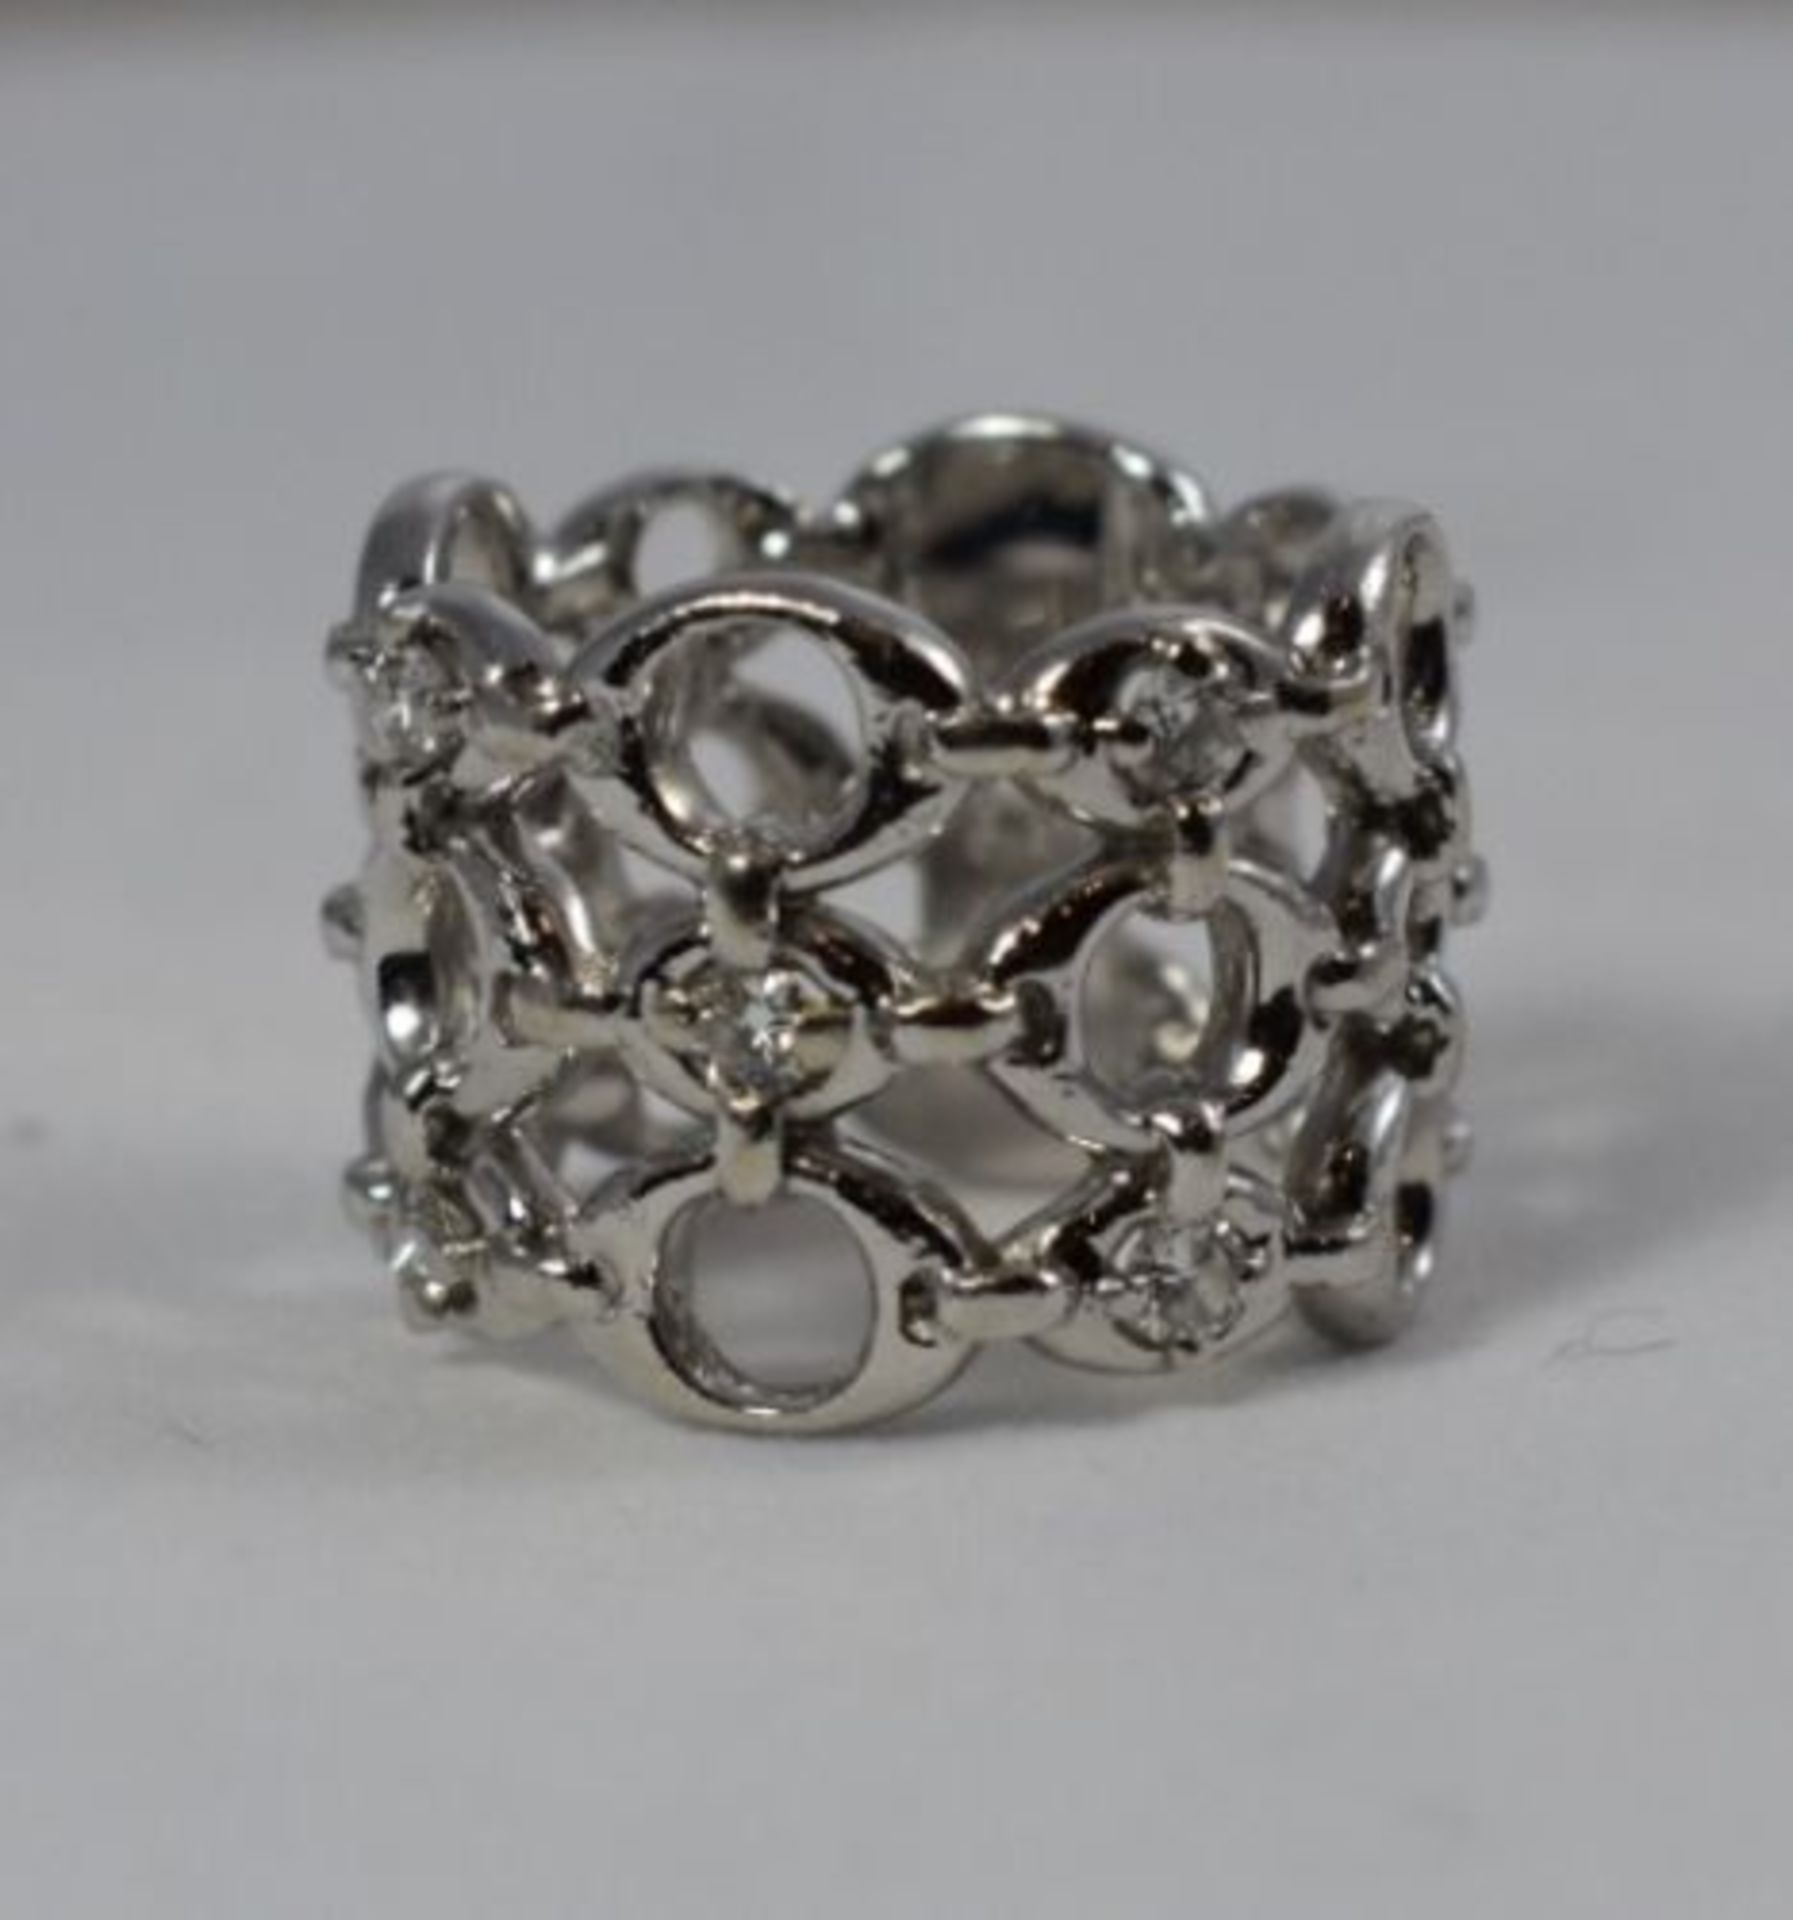 Christian Dior Diamond Ring set in 18 ct White Gold - Image 8 of 12